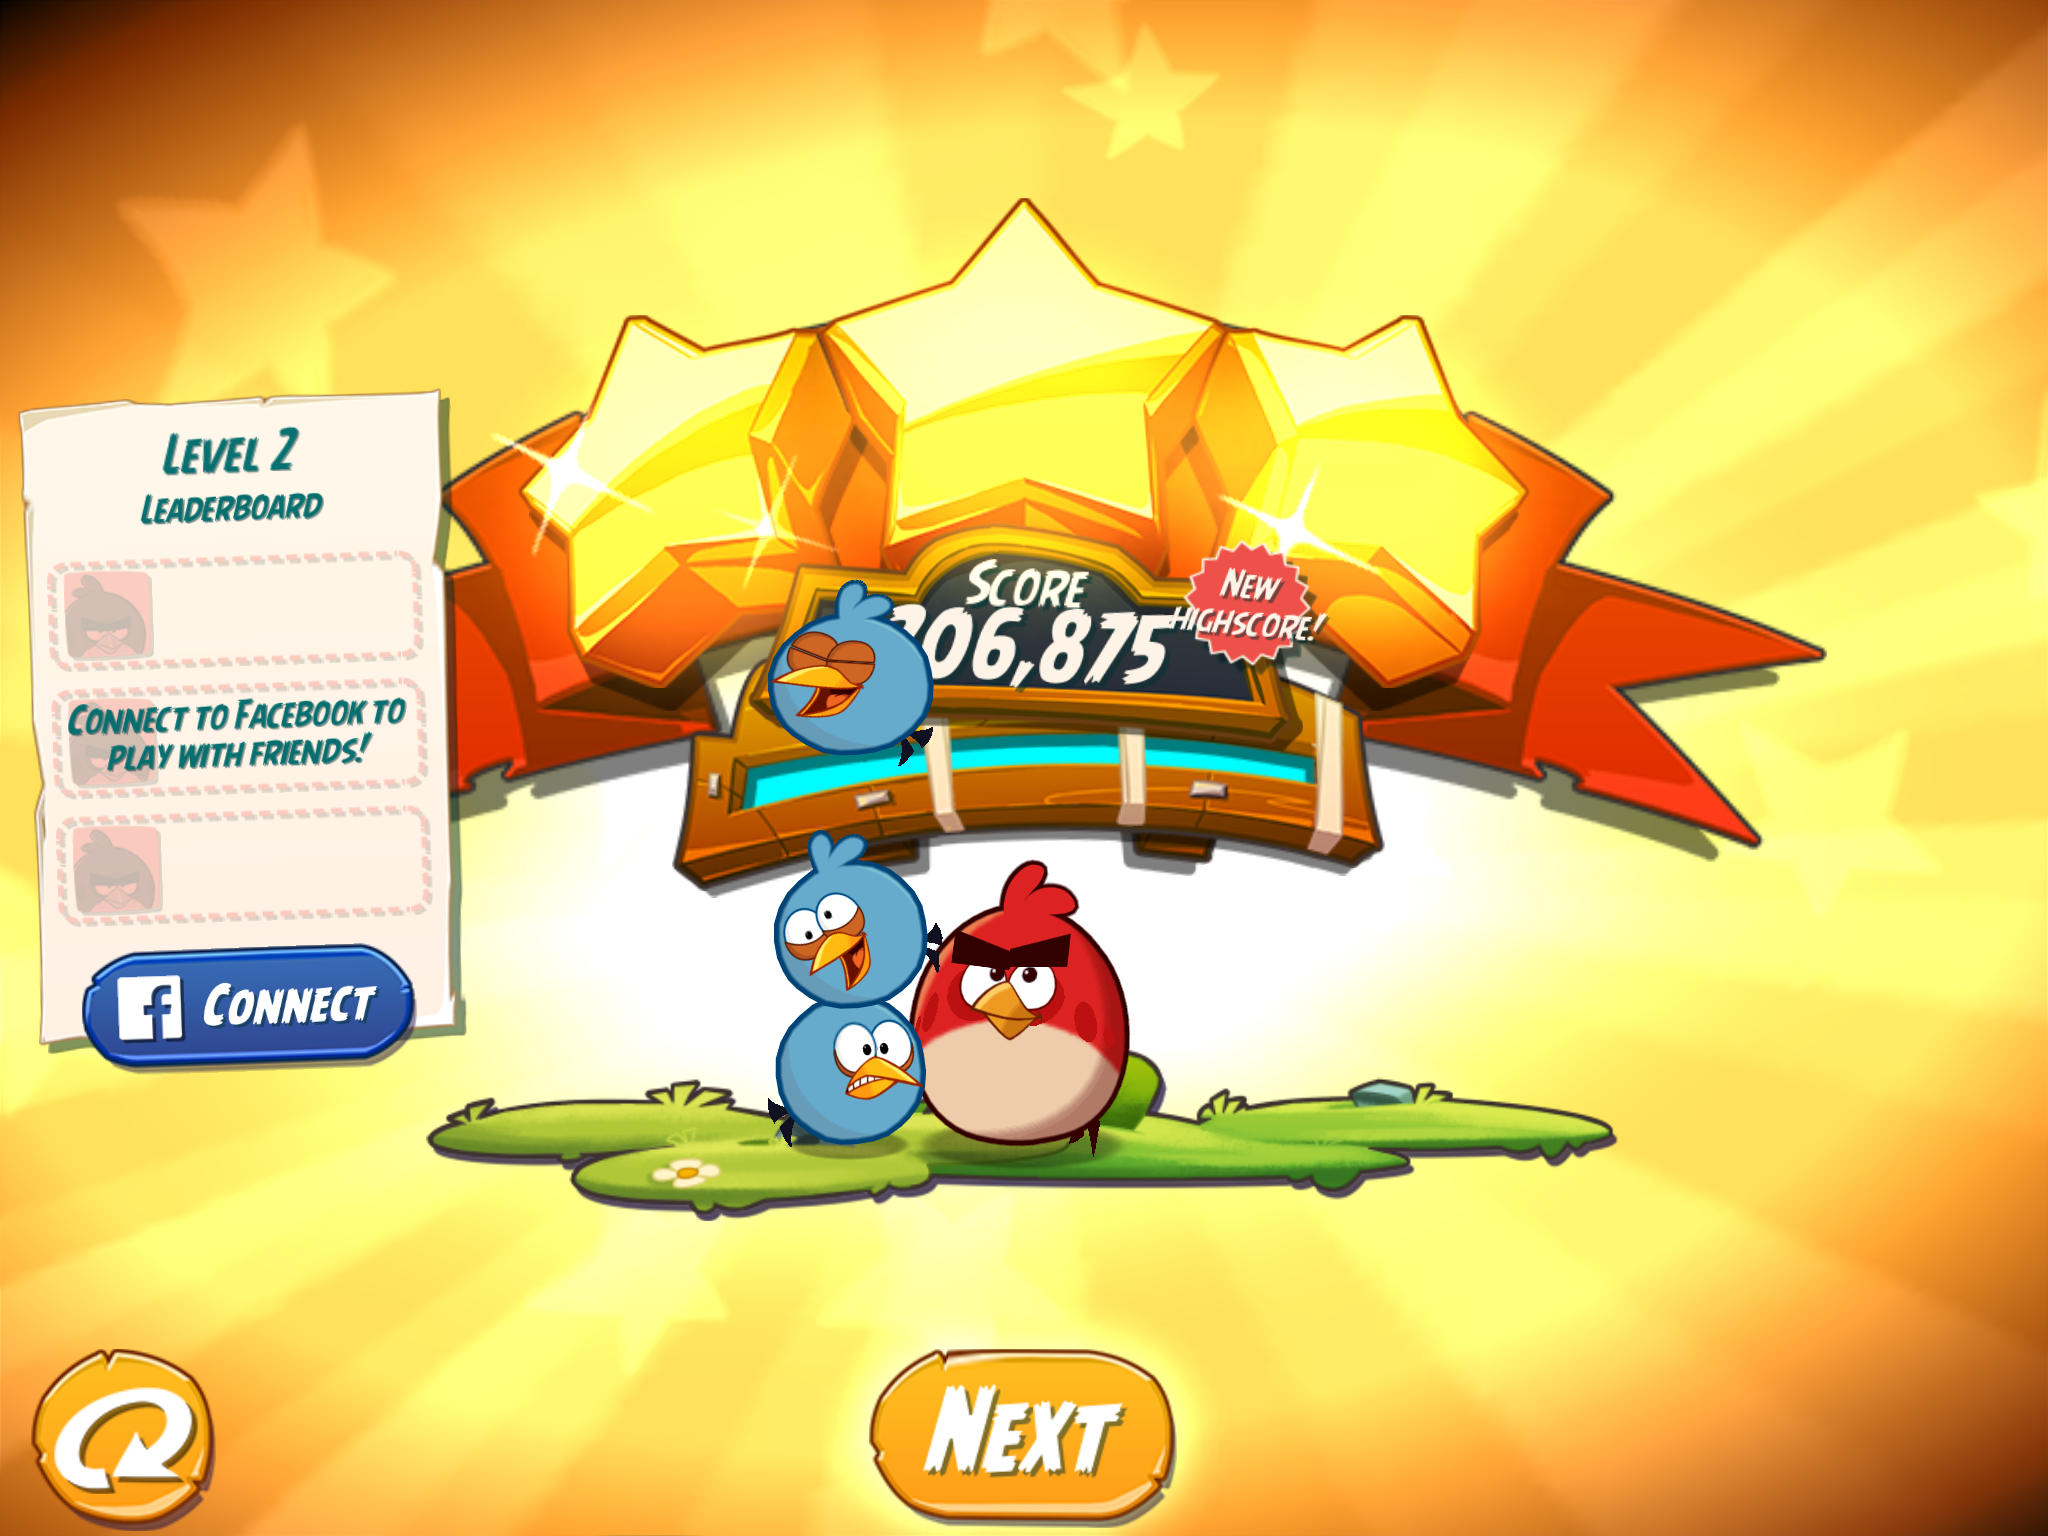 Angry Birds 2: Level 2 206,875 points